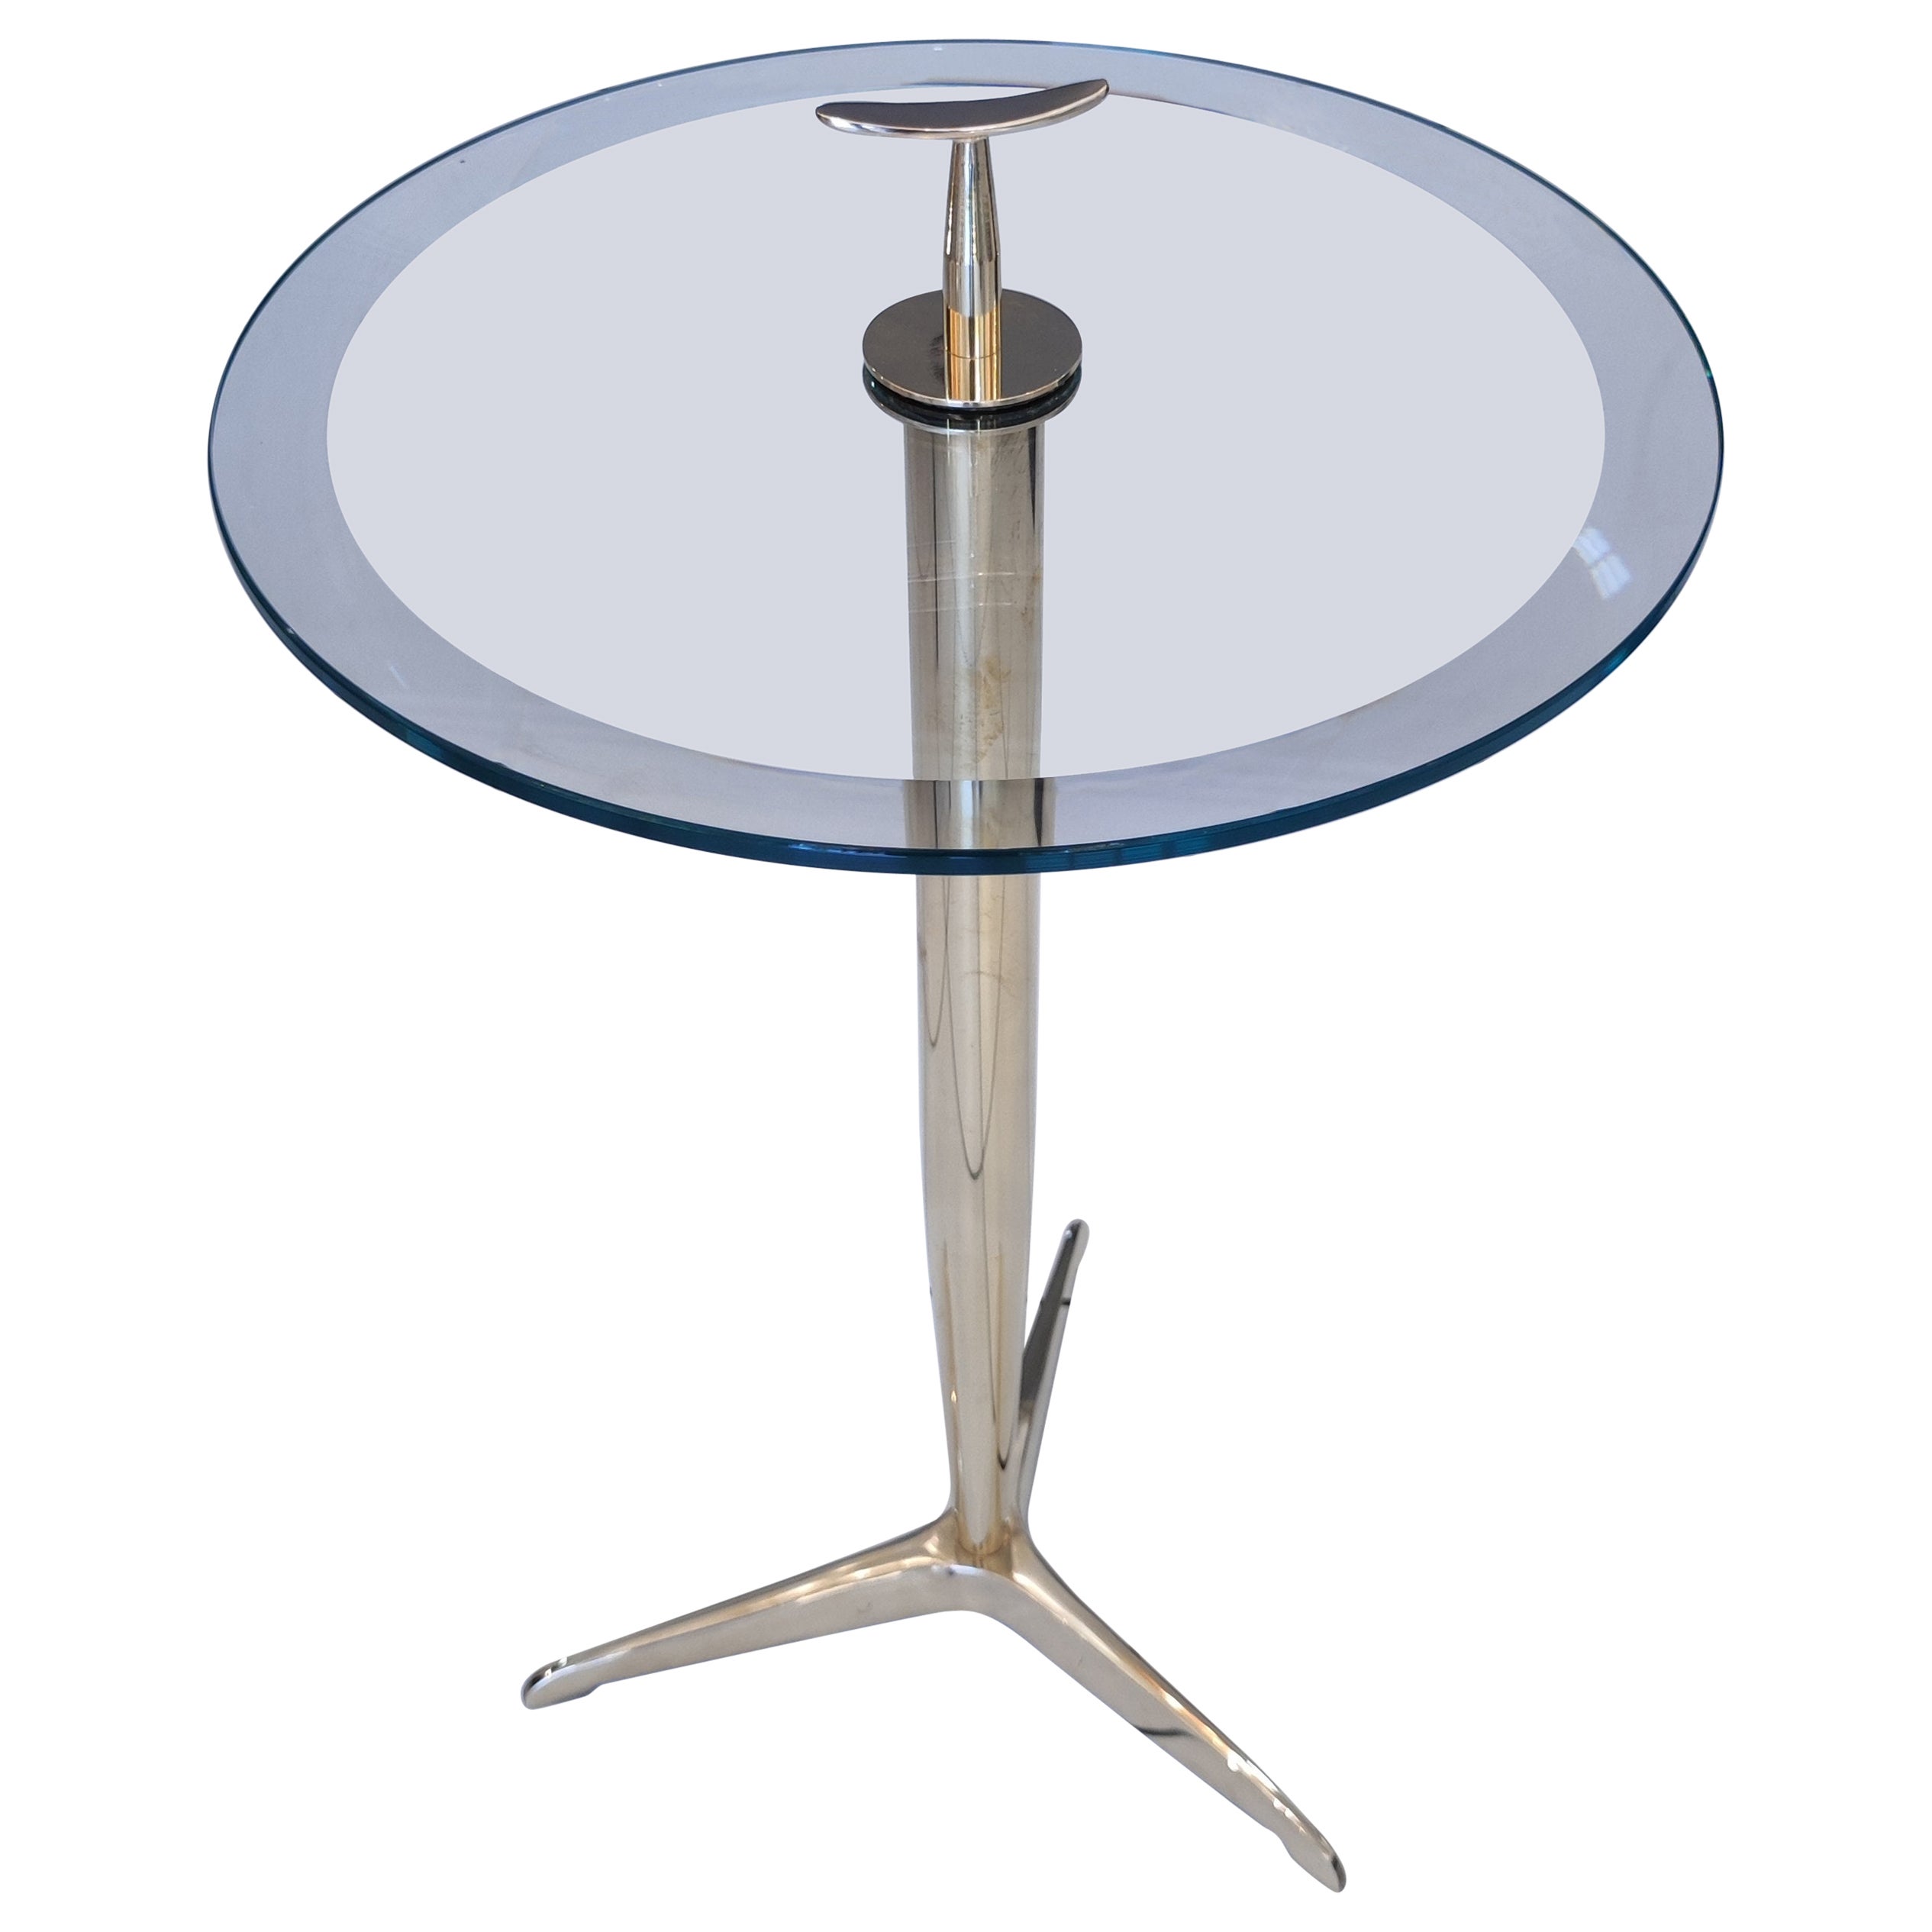 Brass and glass gueridon,
thick and beveled glass top
H without handle : 60cm.

